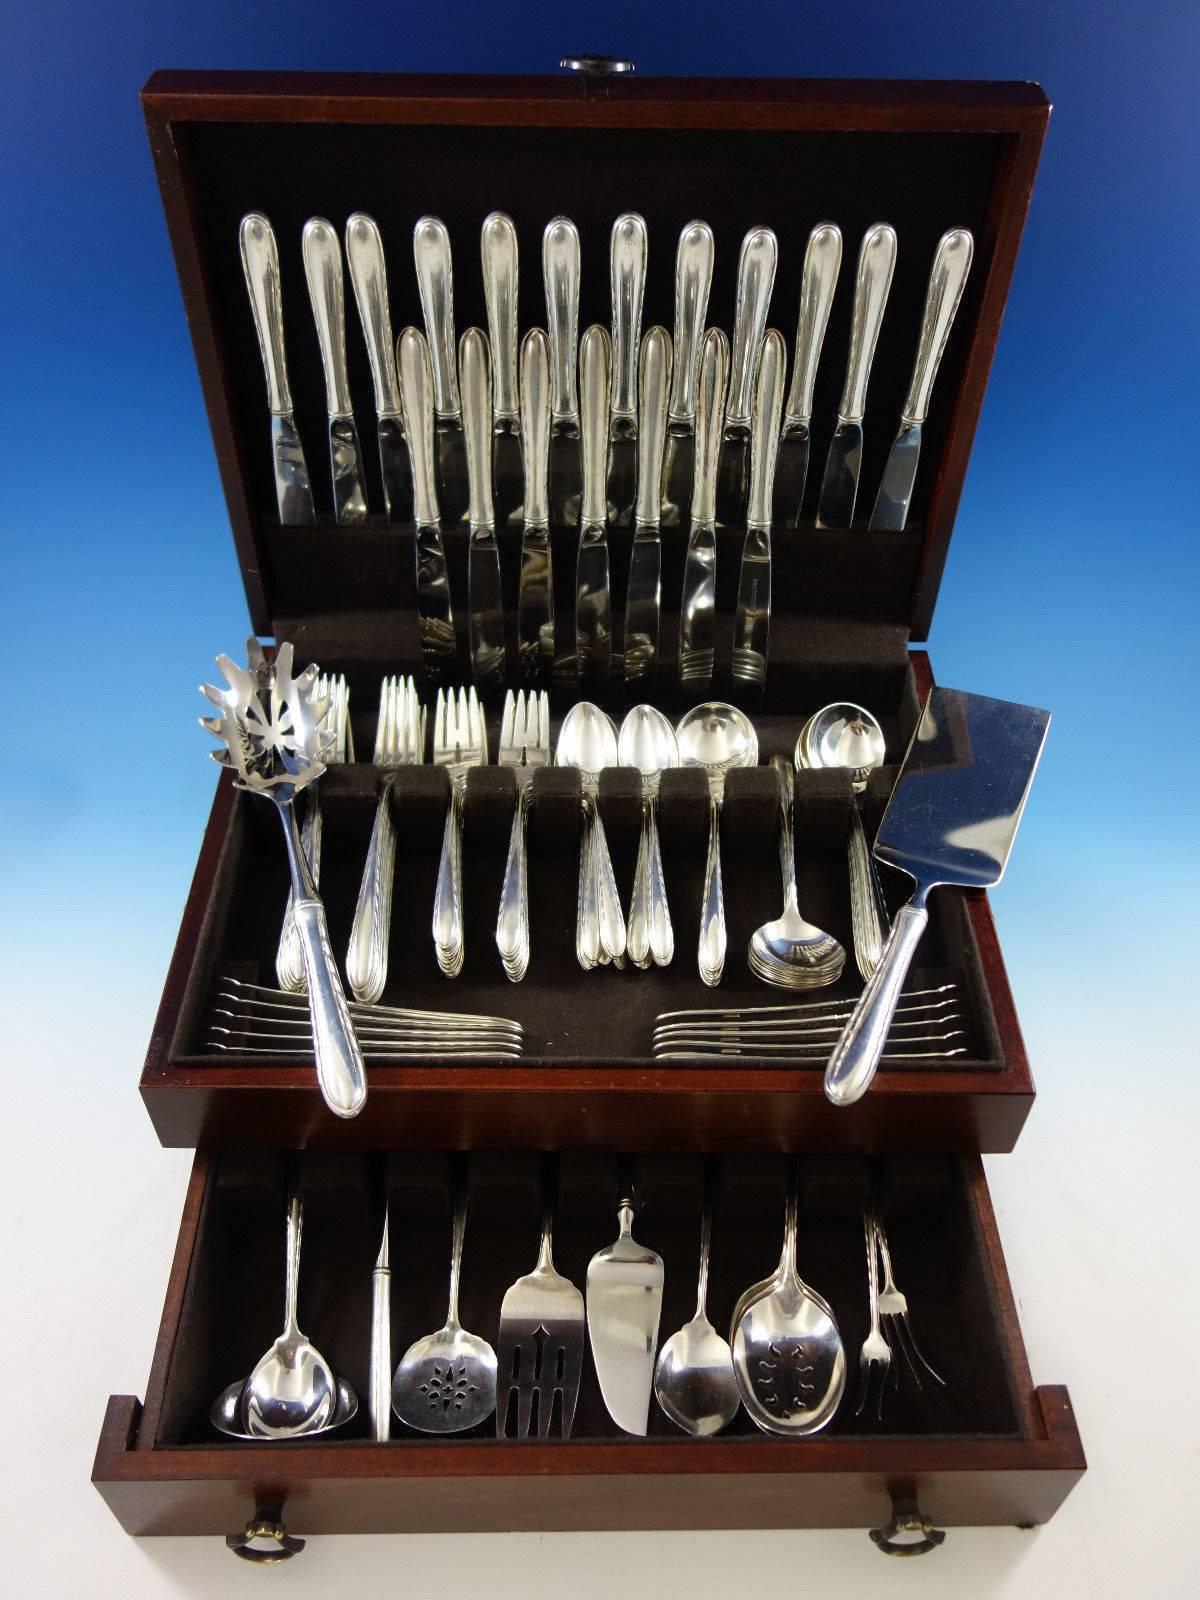 Monumental silver flutes by Towle sterling silver flatware set for 18, 122 pieces. Perfect for entertaining a large group! This set includes: 

18 knives, 8 7/8